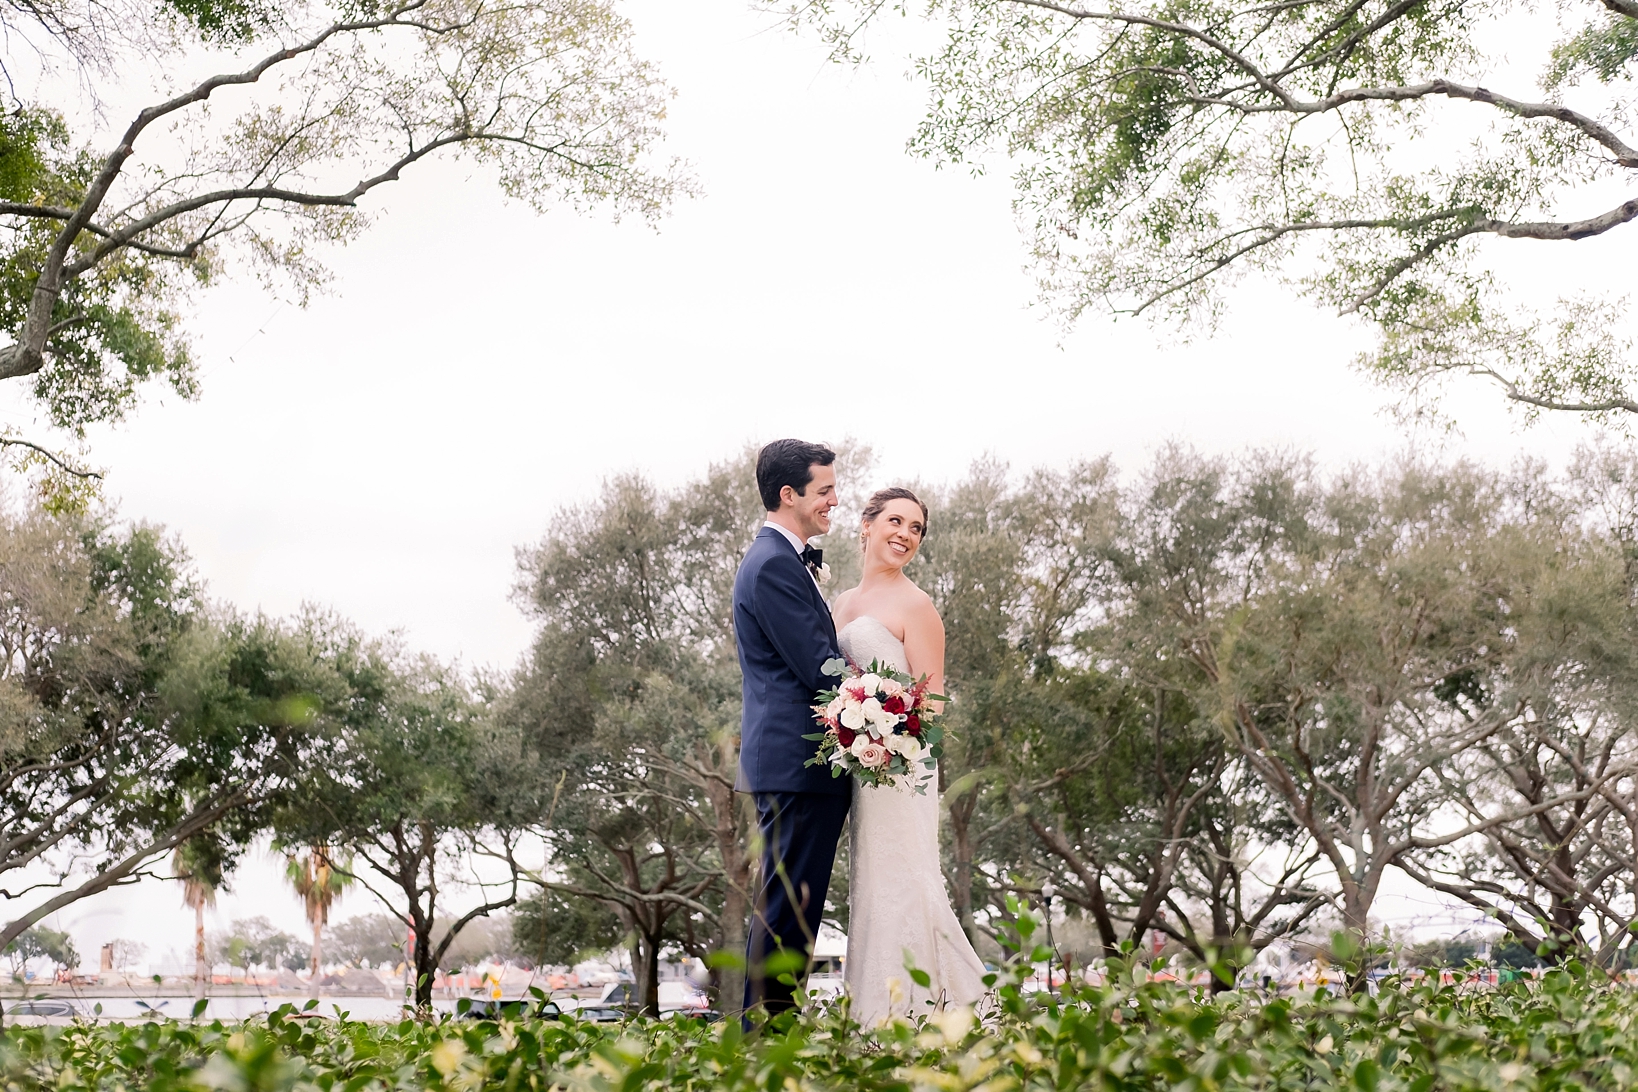 Bridal portraits in St. Pete, Florida surrounded by trees by Sarah & Ben Photography